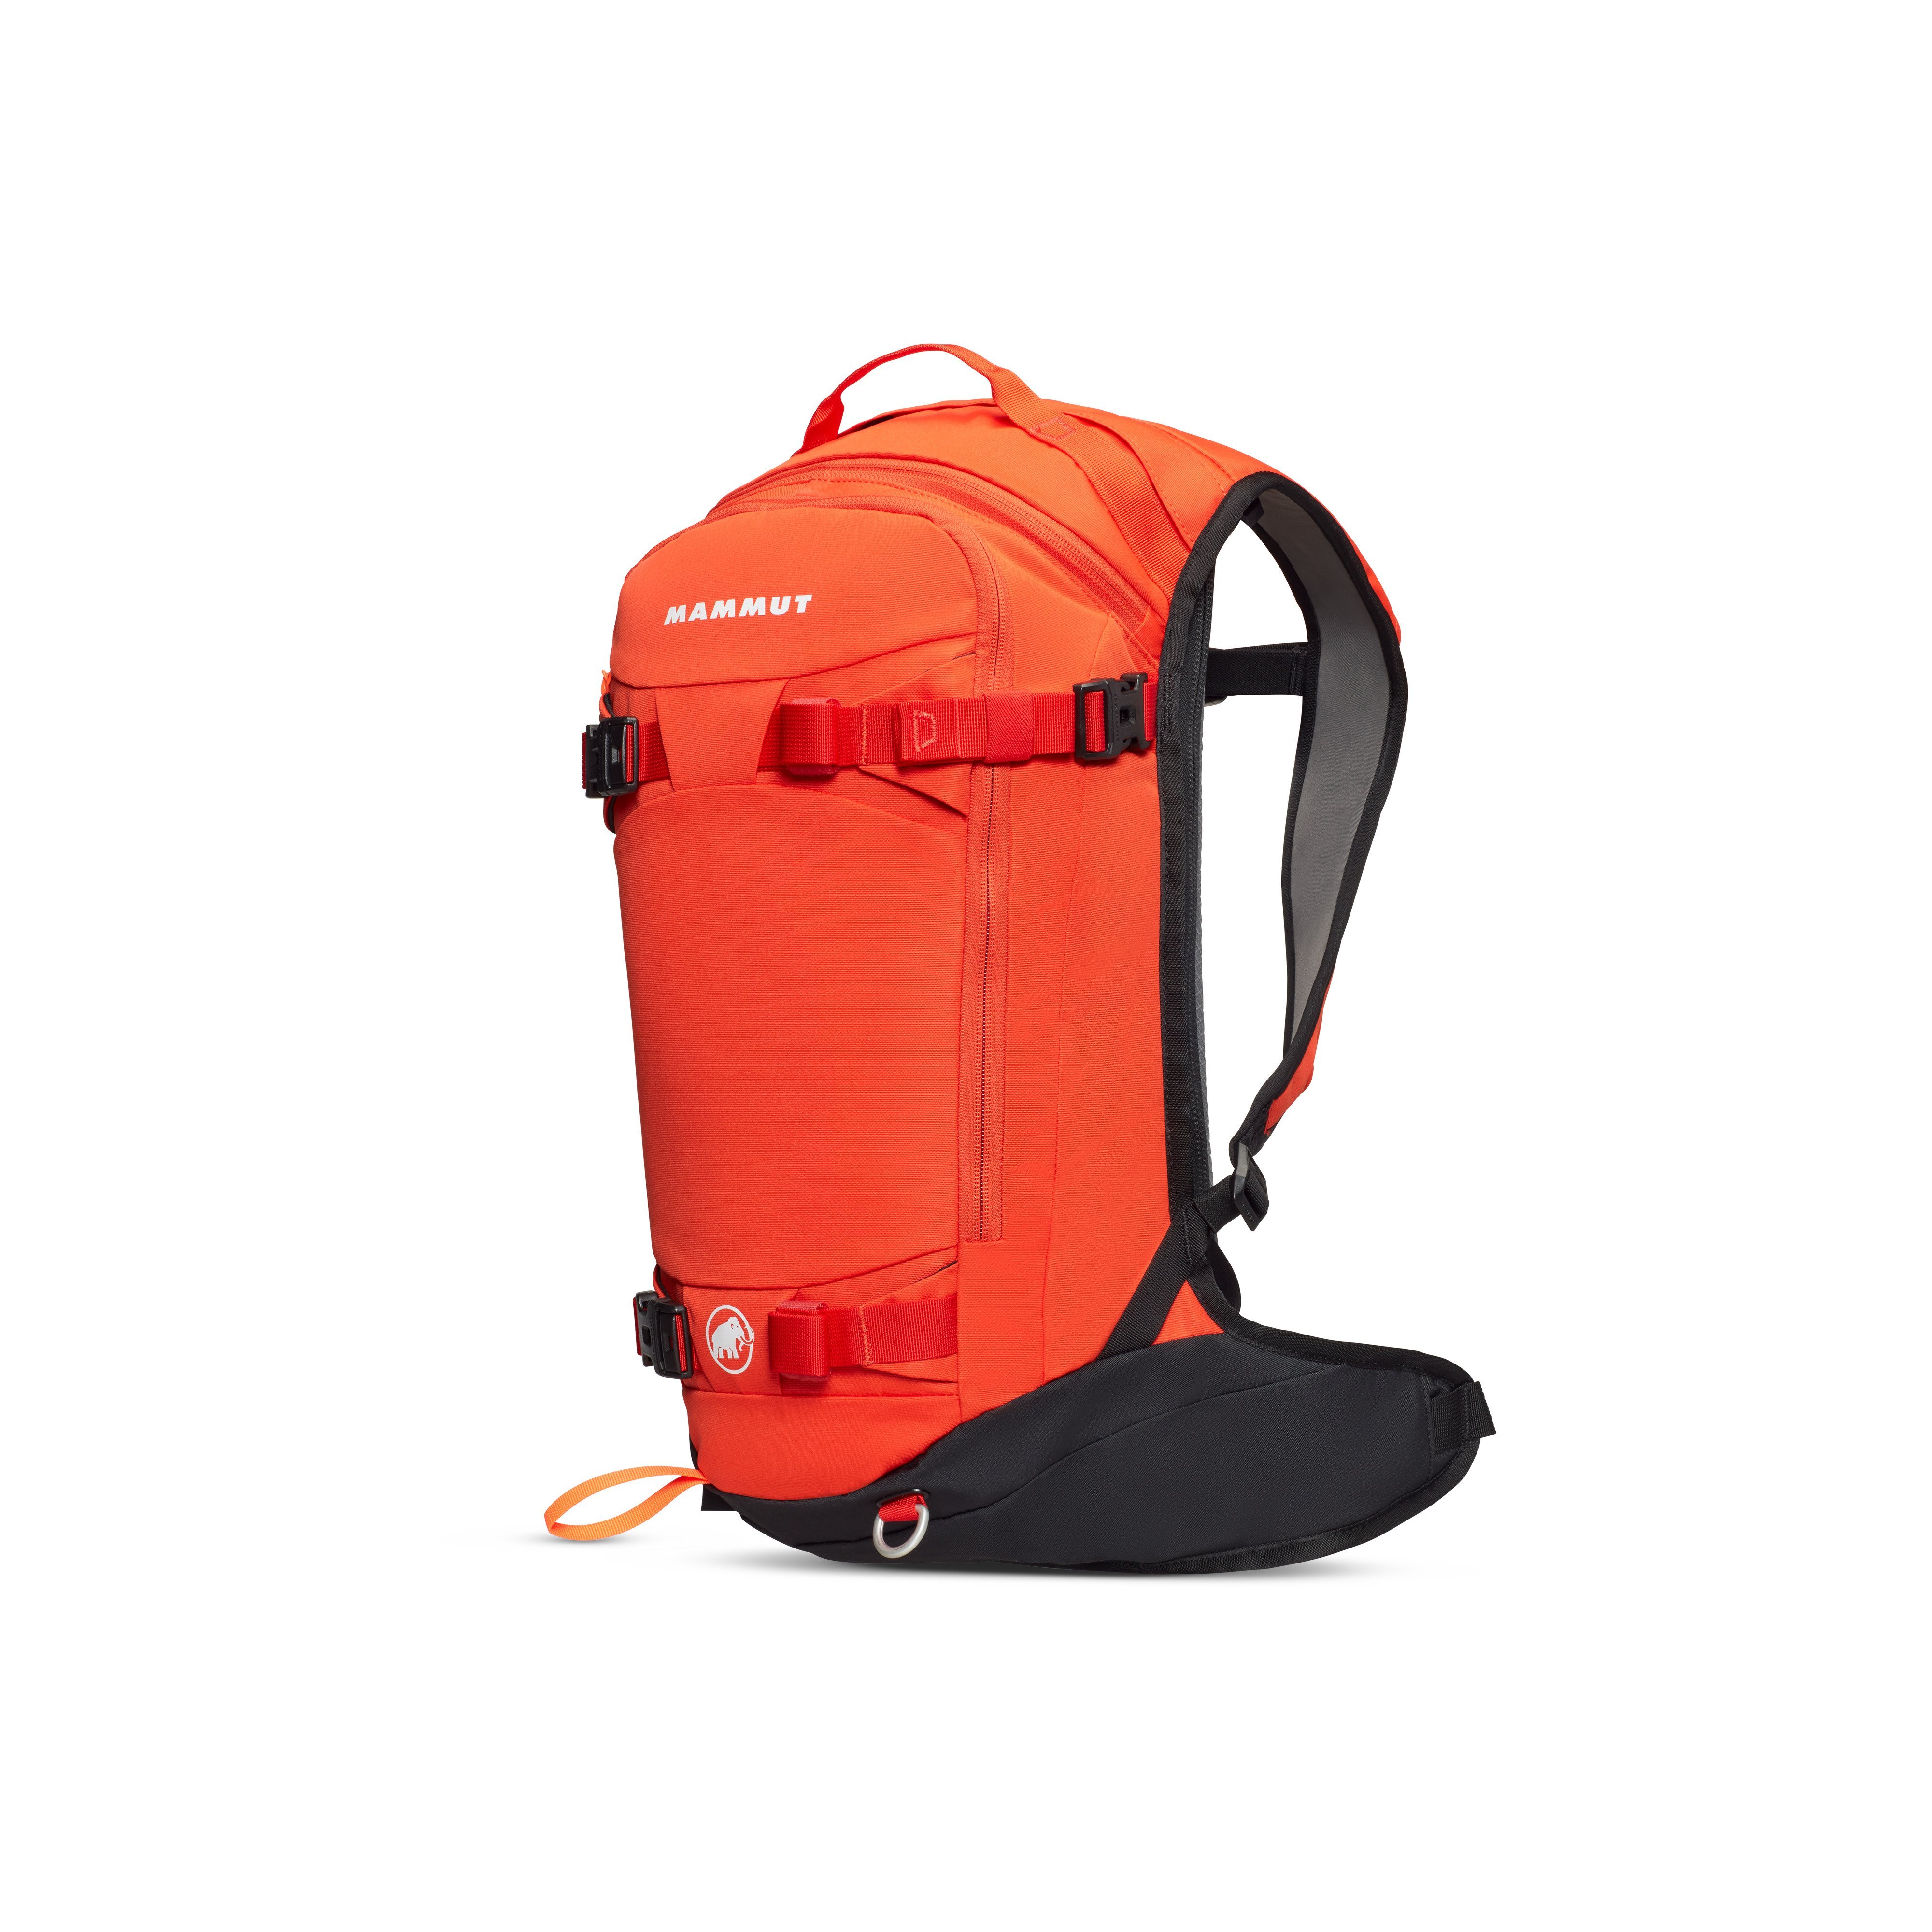 Nirvana 18 - hot red-black, 18 L product image